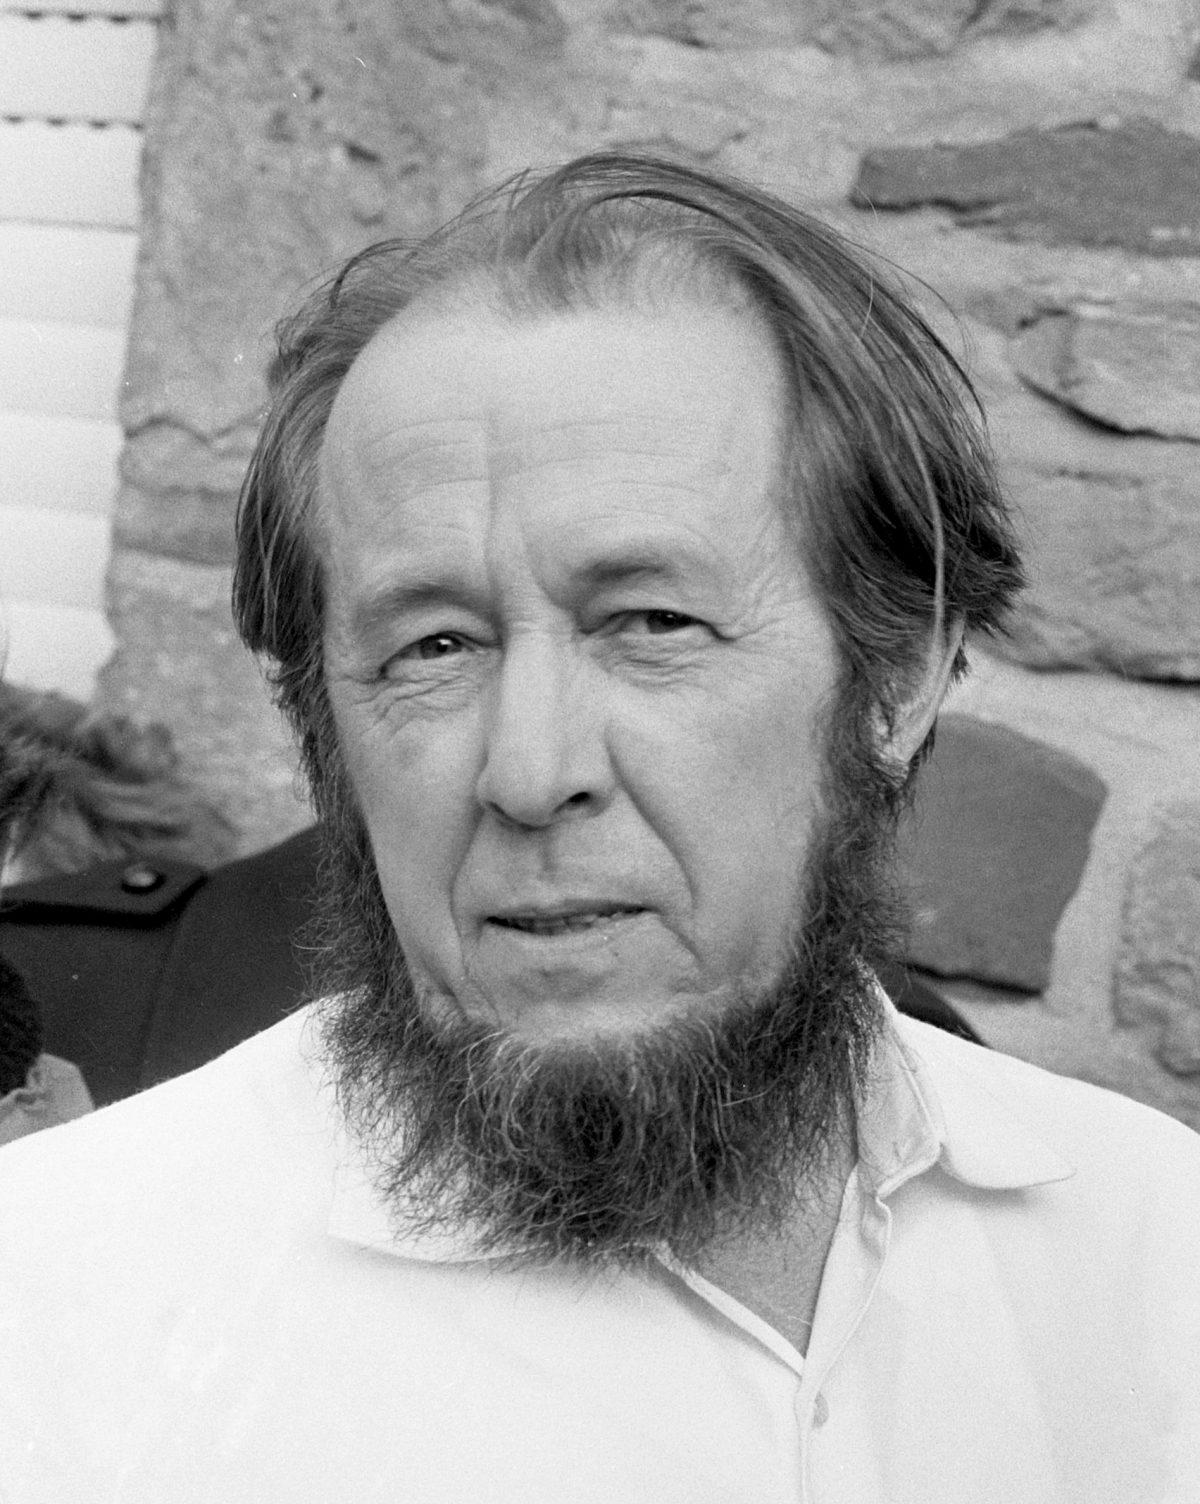 Aleksandr Solzhenitsyn successfully resisted totalitarianism. (CC BY 1.0)